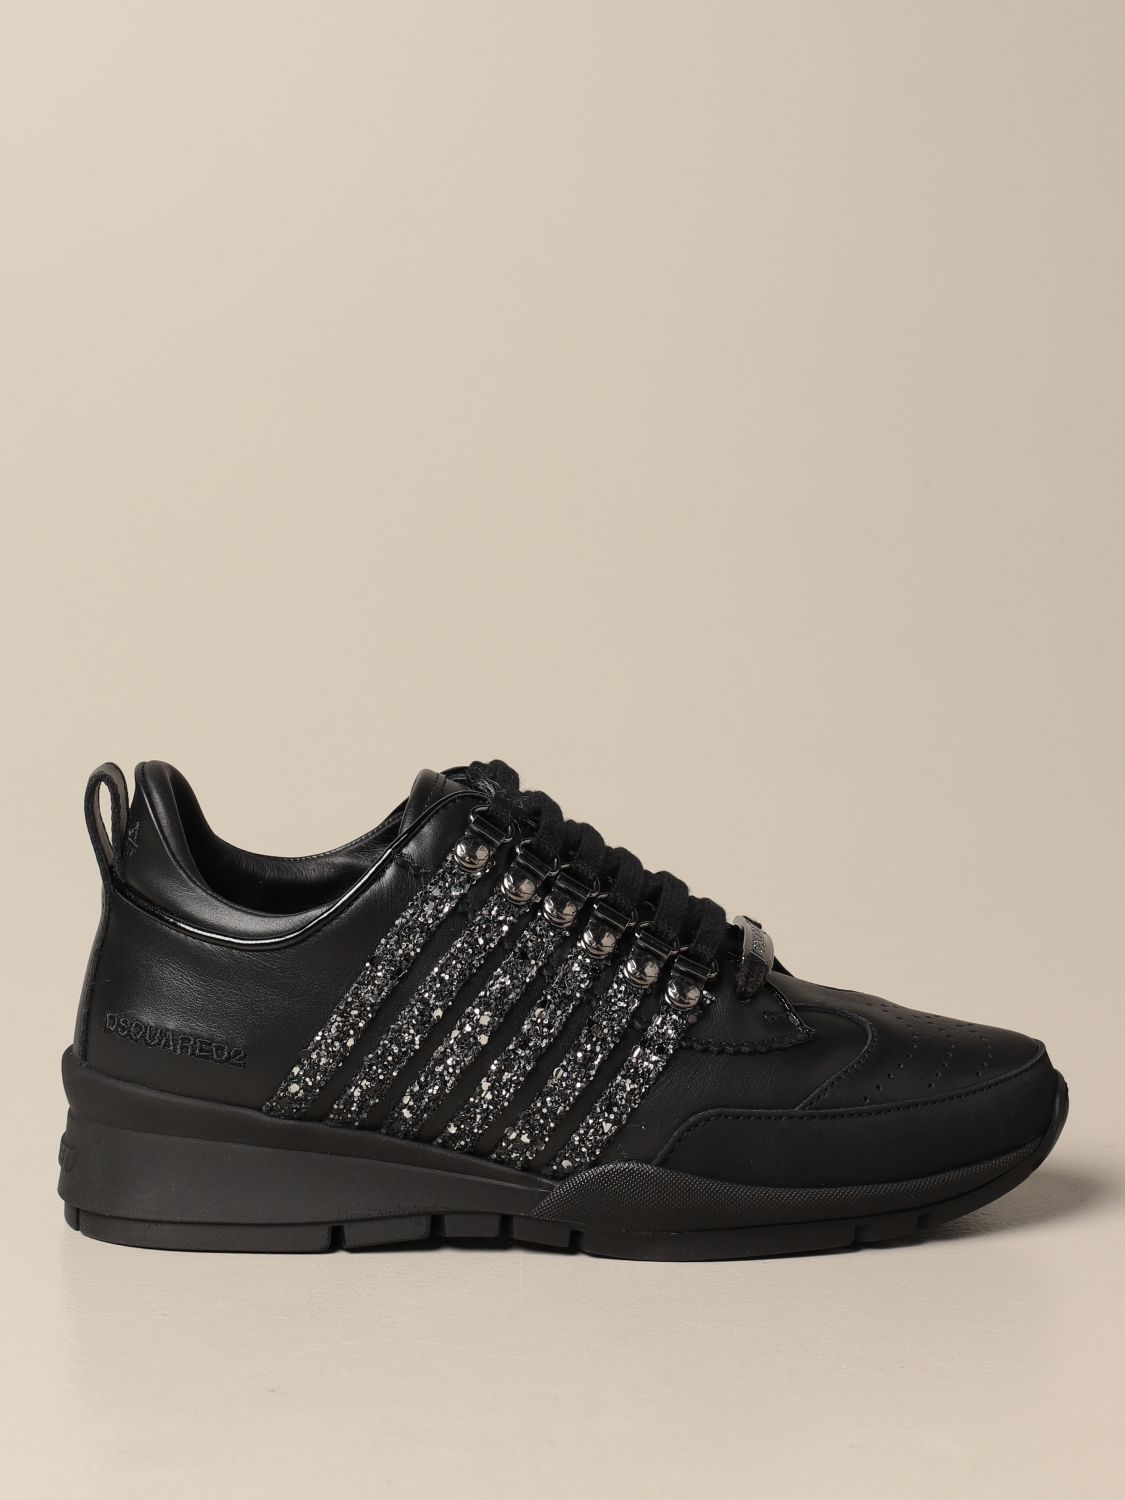 afstuderen Overtollig bereiden Dsquared2 Outlet: 251 sneakers in leather with glitter bands - Black |  Dsquared2 sneakers SNW0109 06501472-CALF+GLITTER online on GIGLIO.COM